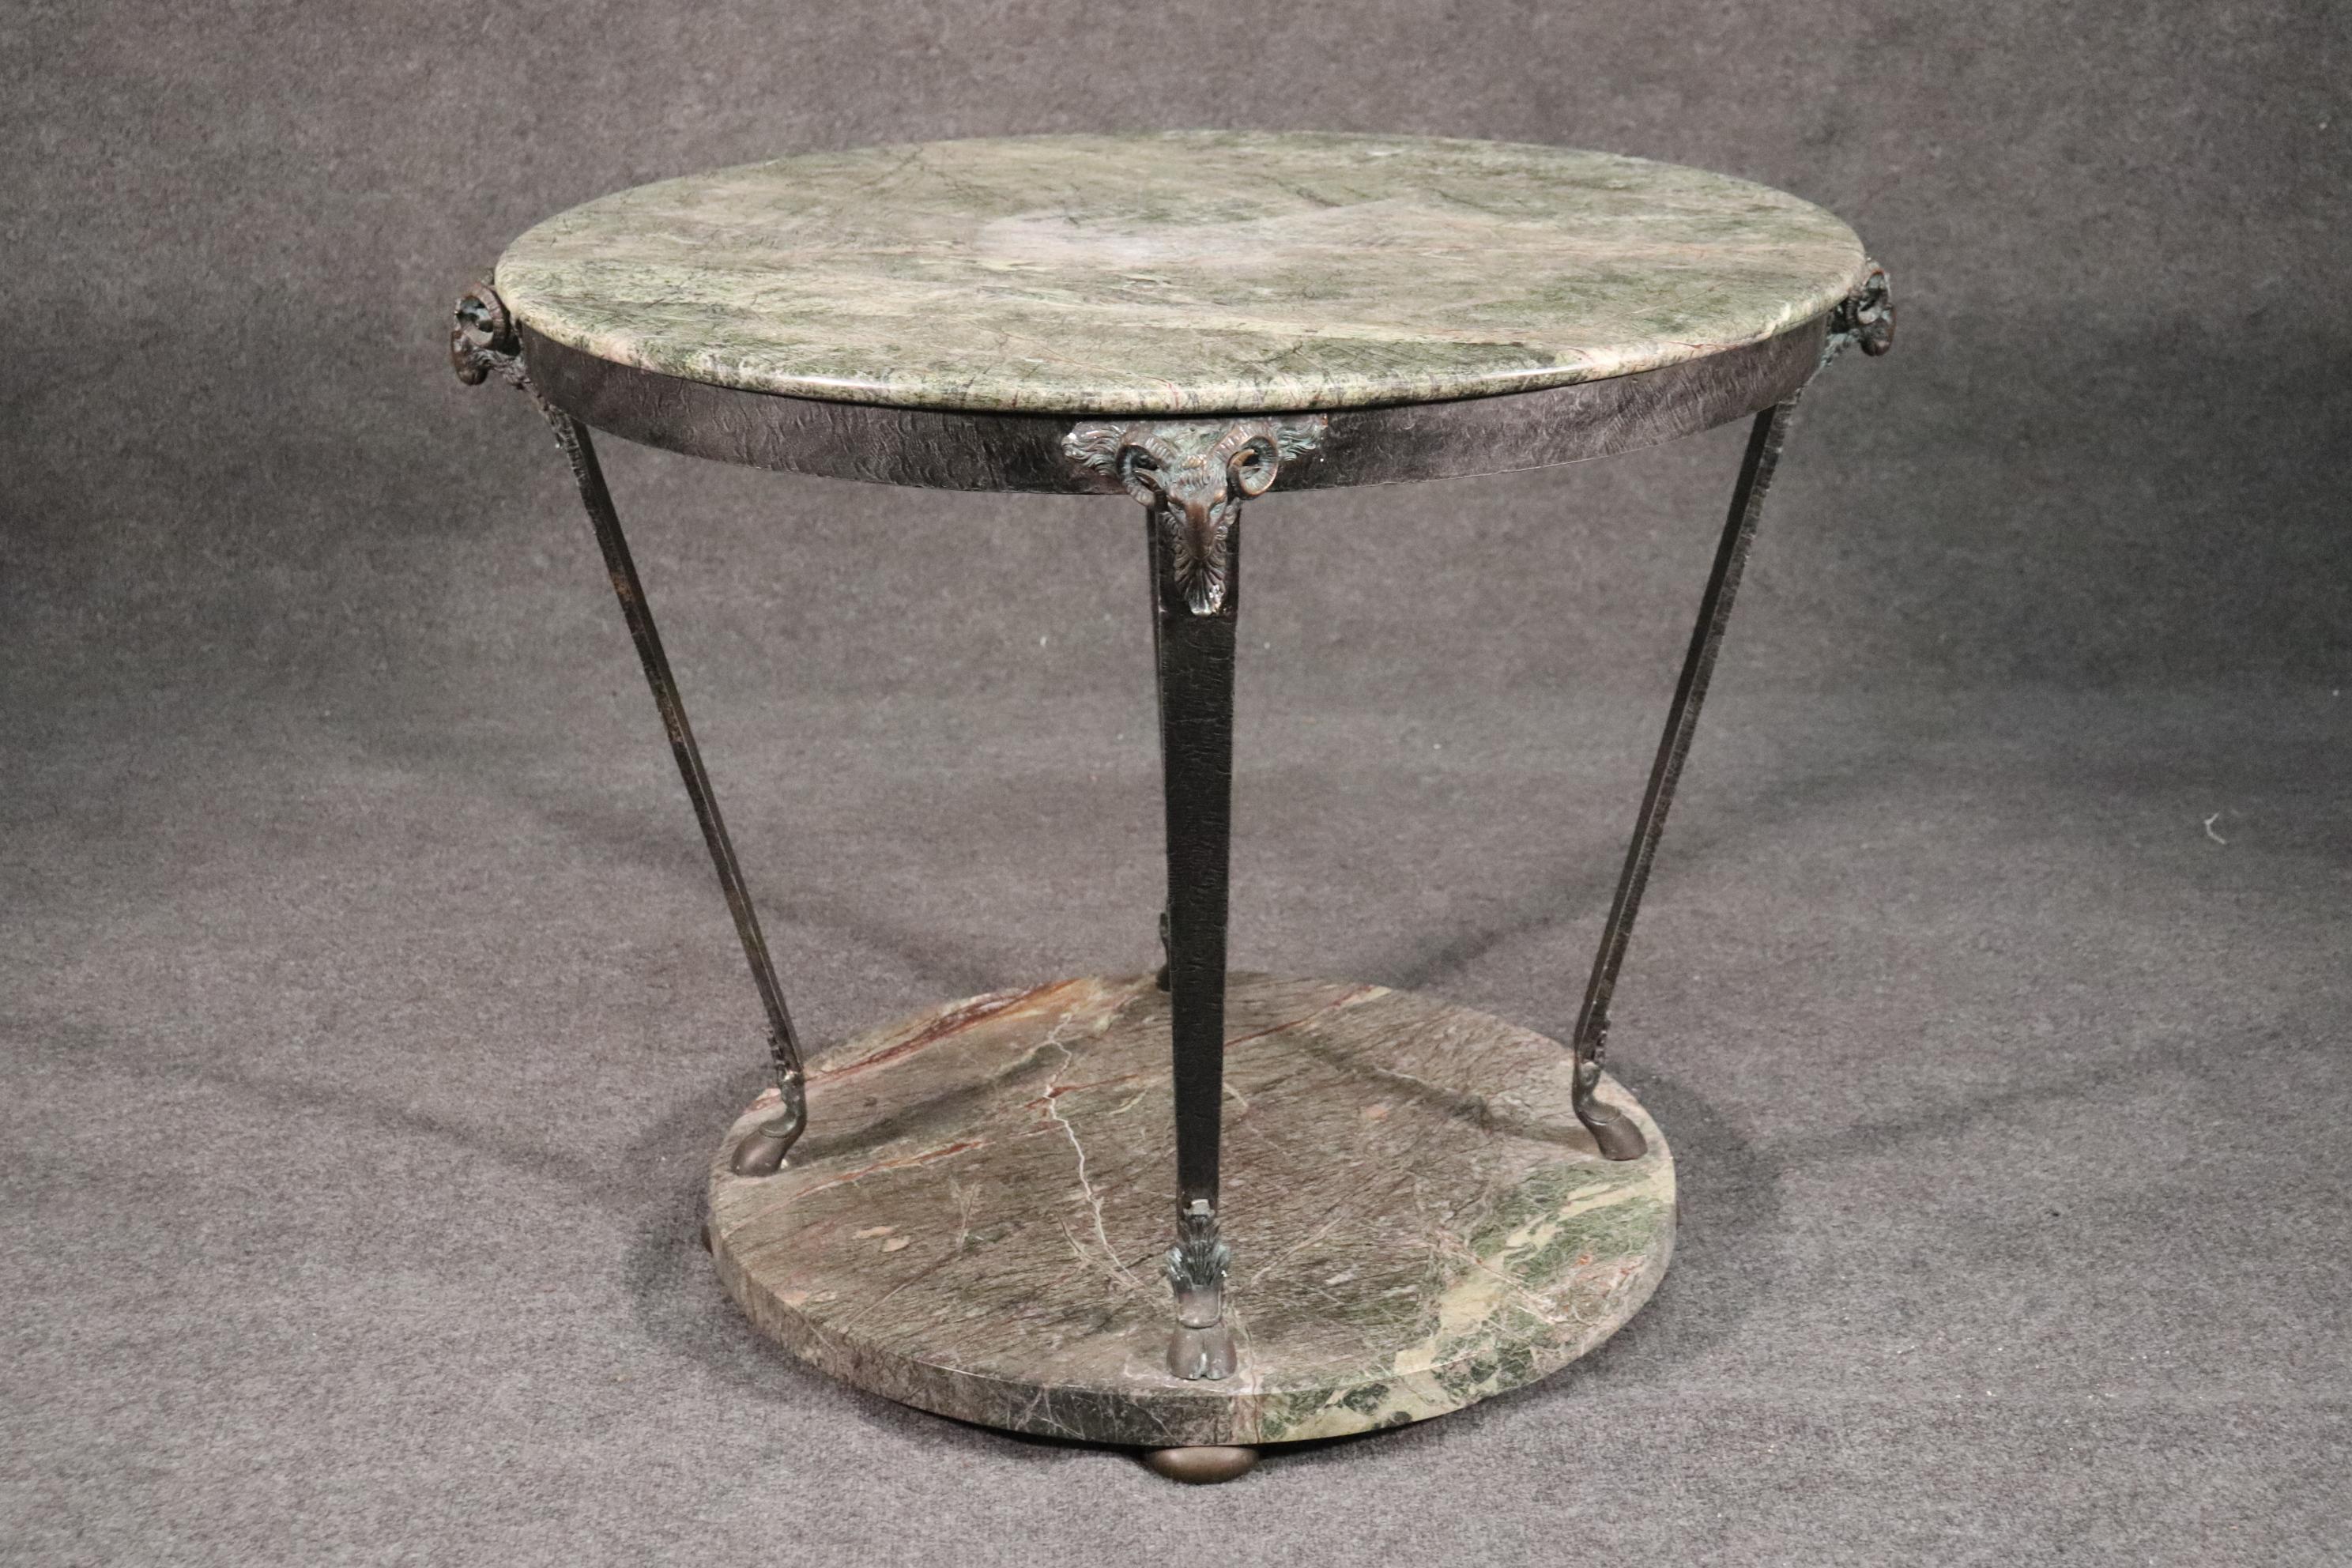 Regency Revival Rare Bronze and Marble French Regency Style Round Center Table